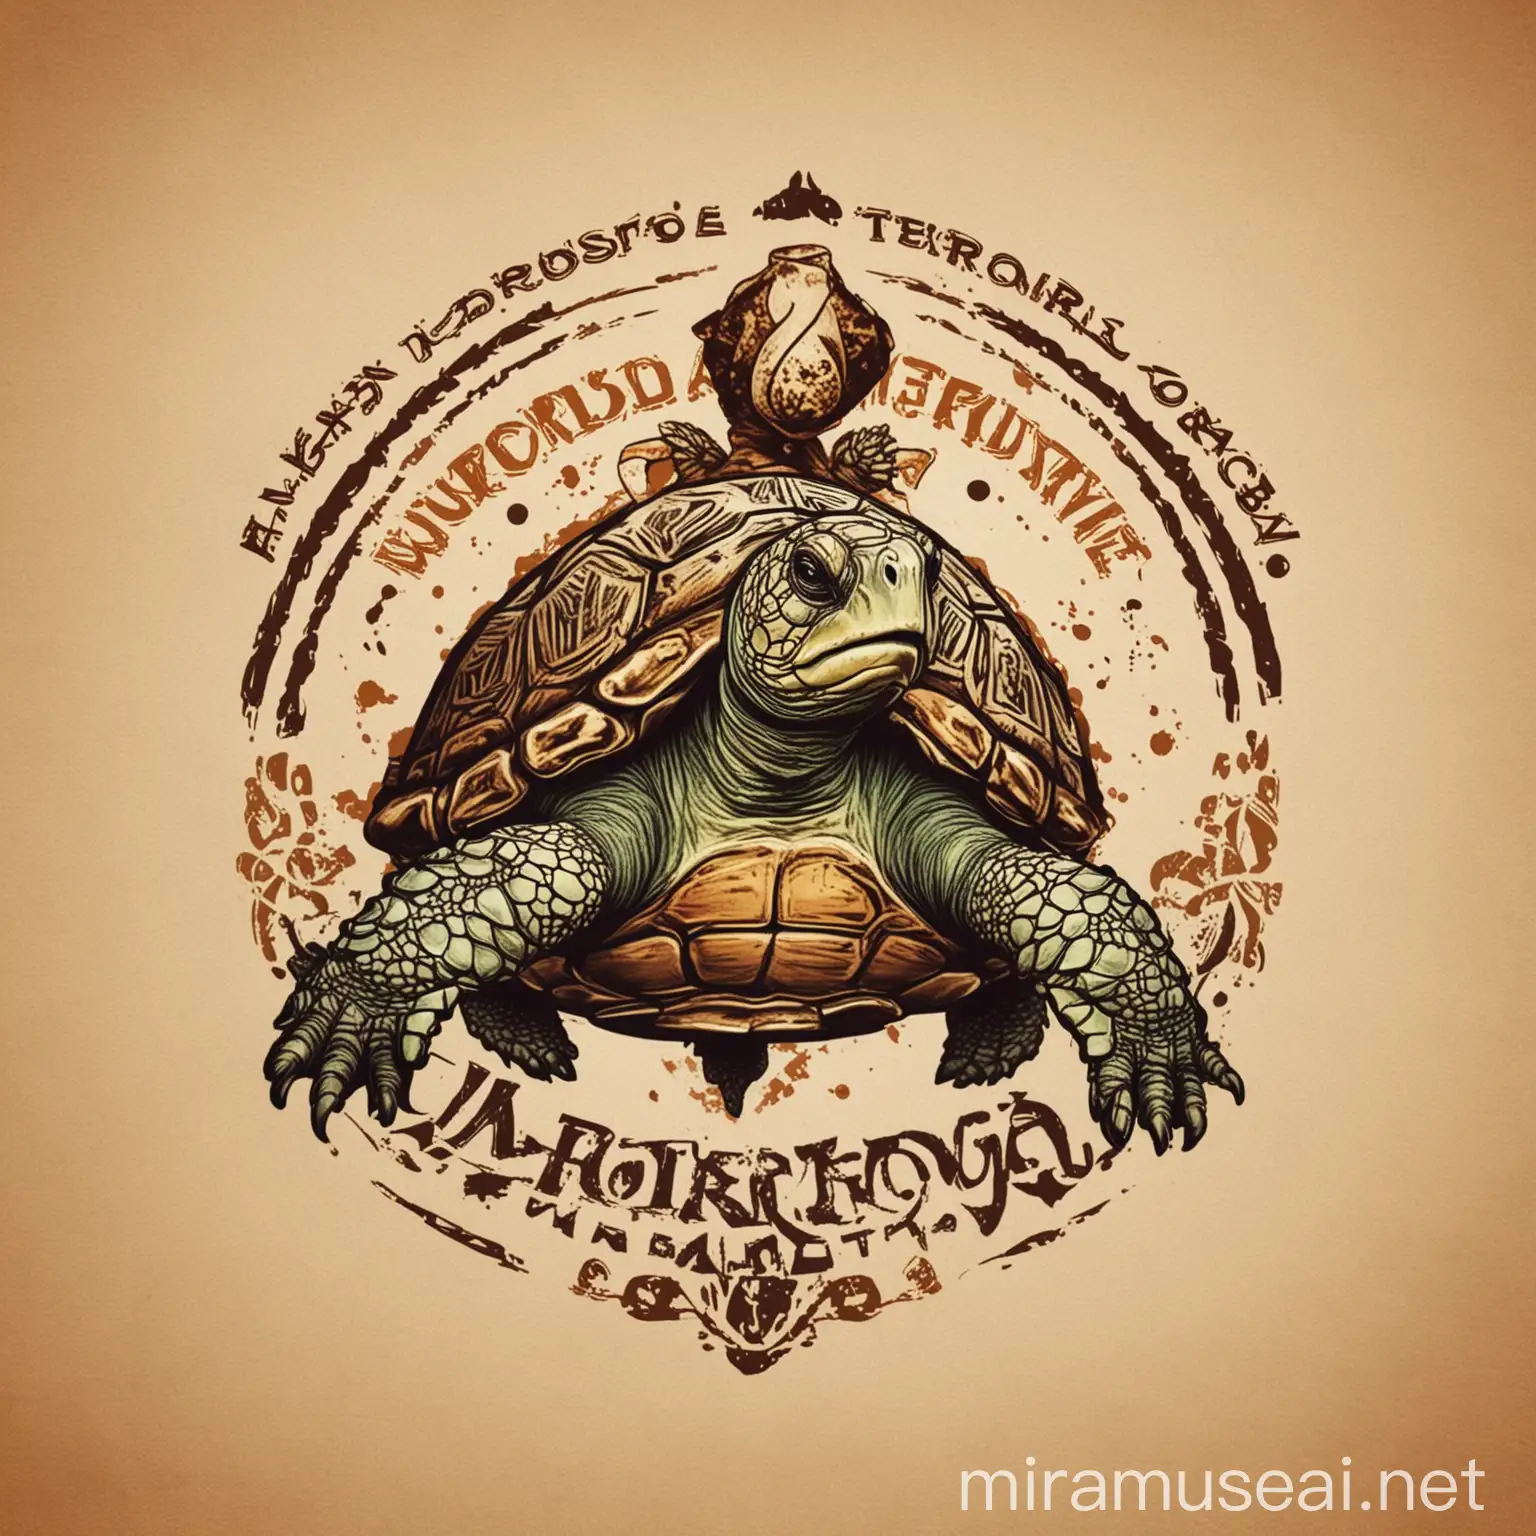 Create the logo of an epic turtle with the word "Morrocoya"